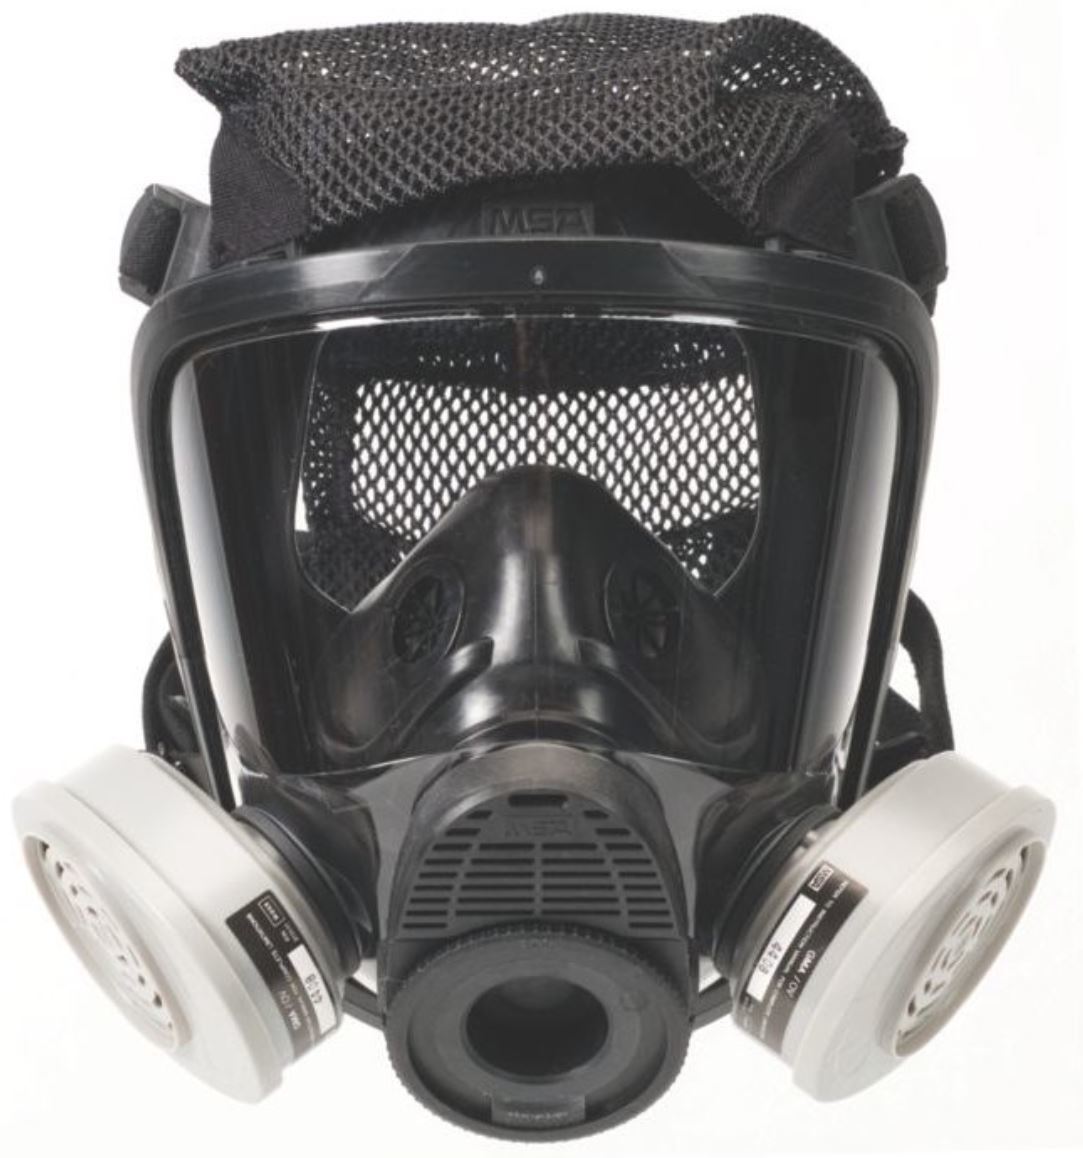 Thread about masks and respirators: should they be worn by healthy people or only sick people? - Coronavirus, Epidemic, Protection, Mask, Means of protection, Twitter, Longpost